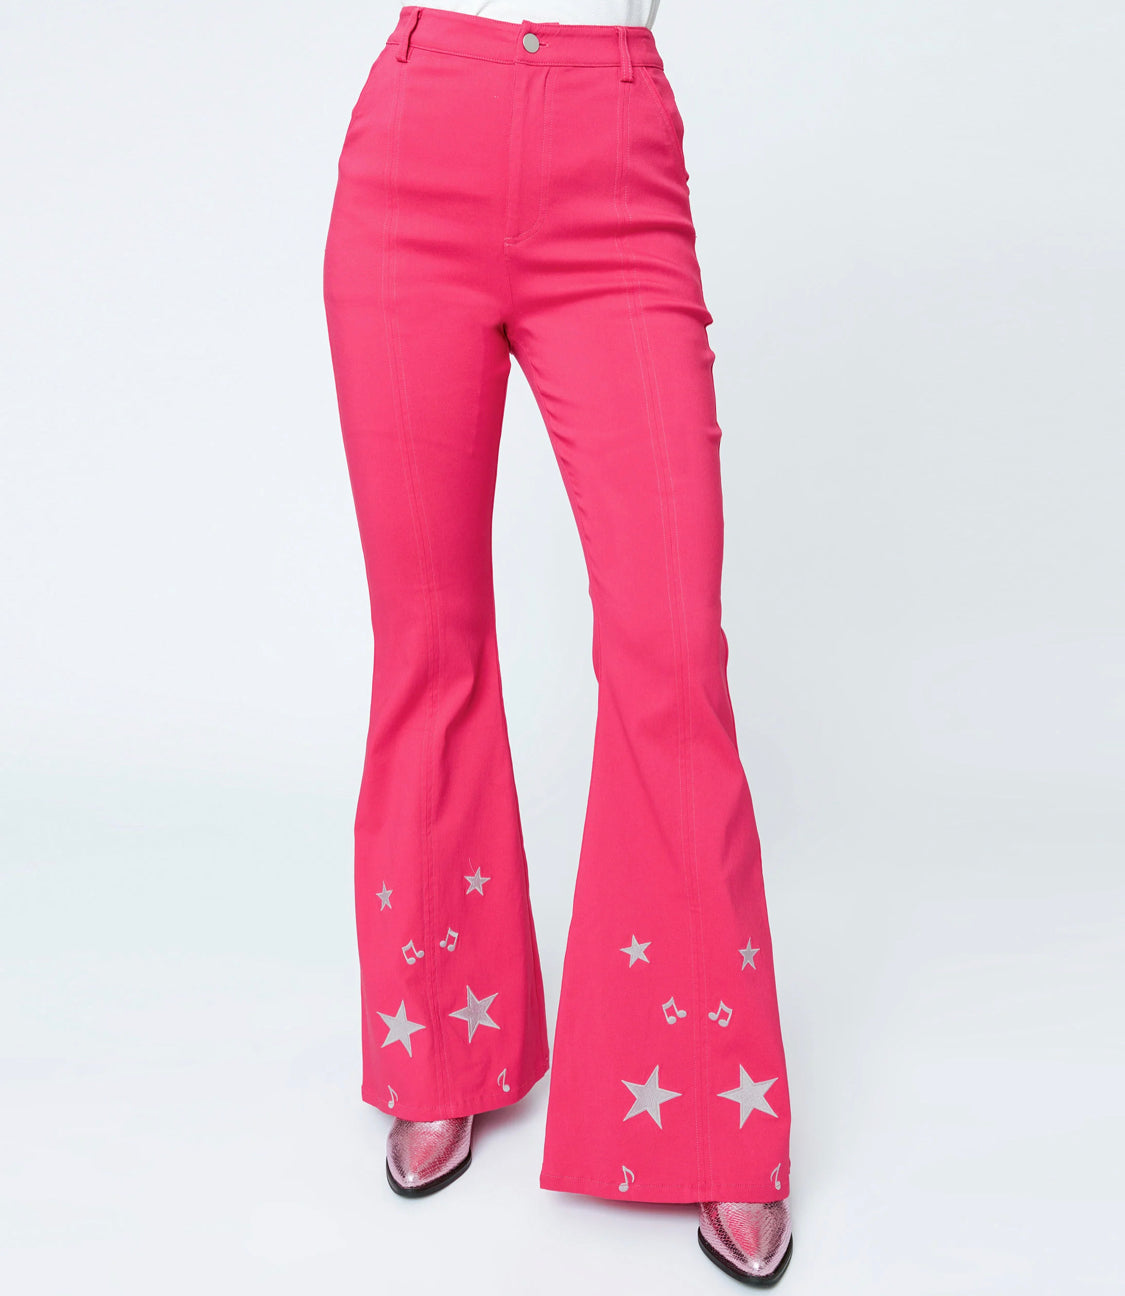 These sensational 1970s style bell bottoms are crafted in a bright pink bengaline stretch with contrast seaming and glittery stars on the flare legs. The banded high waist is cinched with a front zipper and button, outfitted with side and back pockets for modern function!